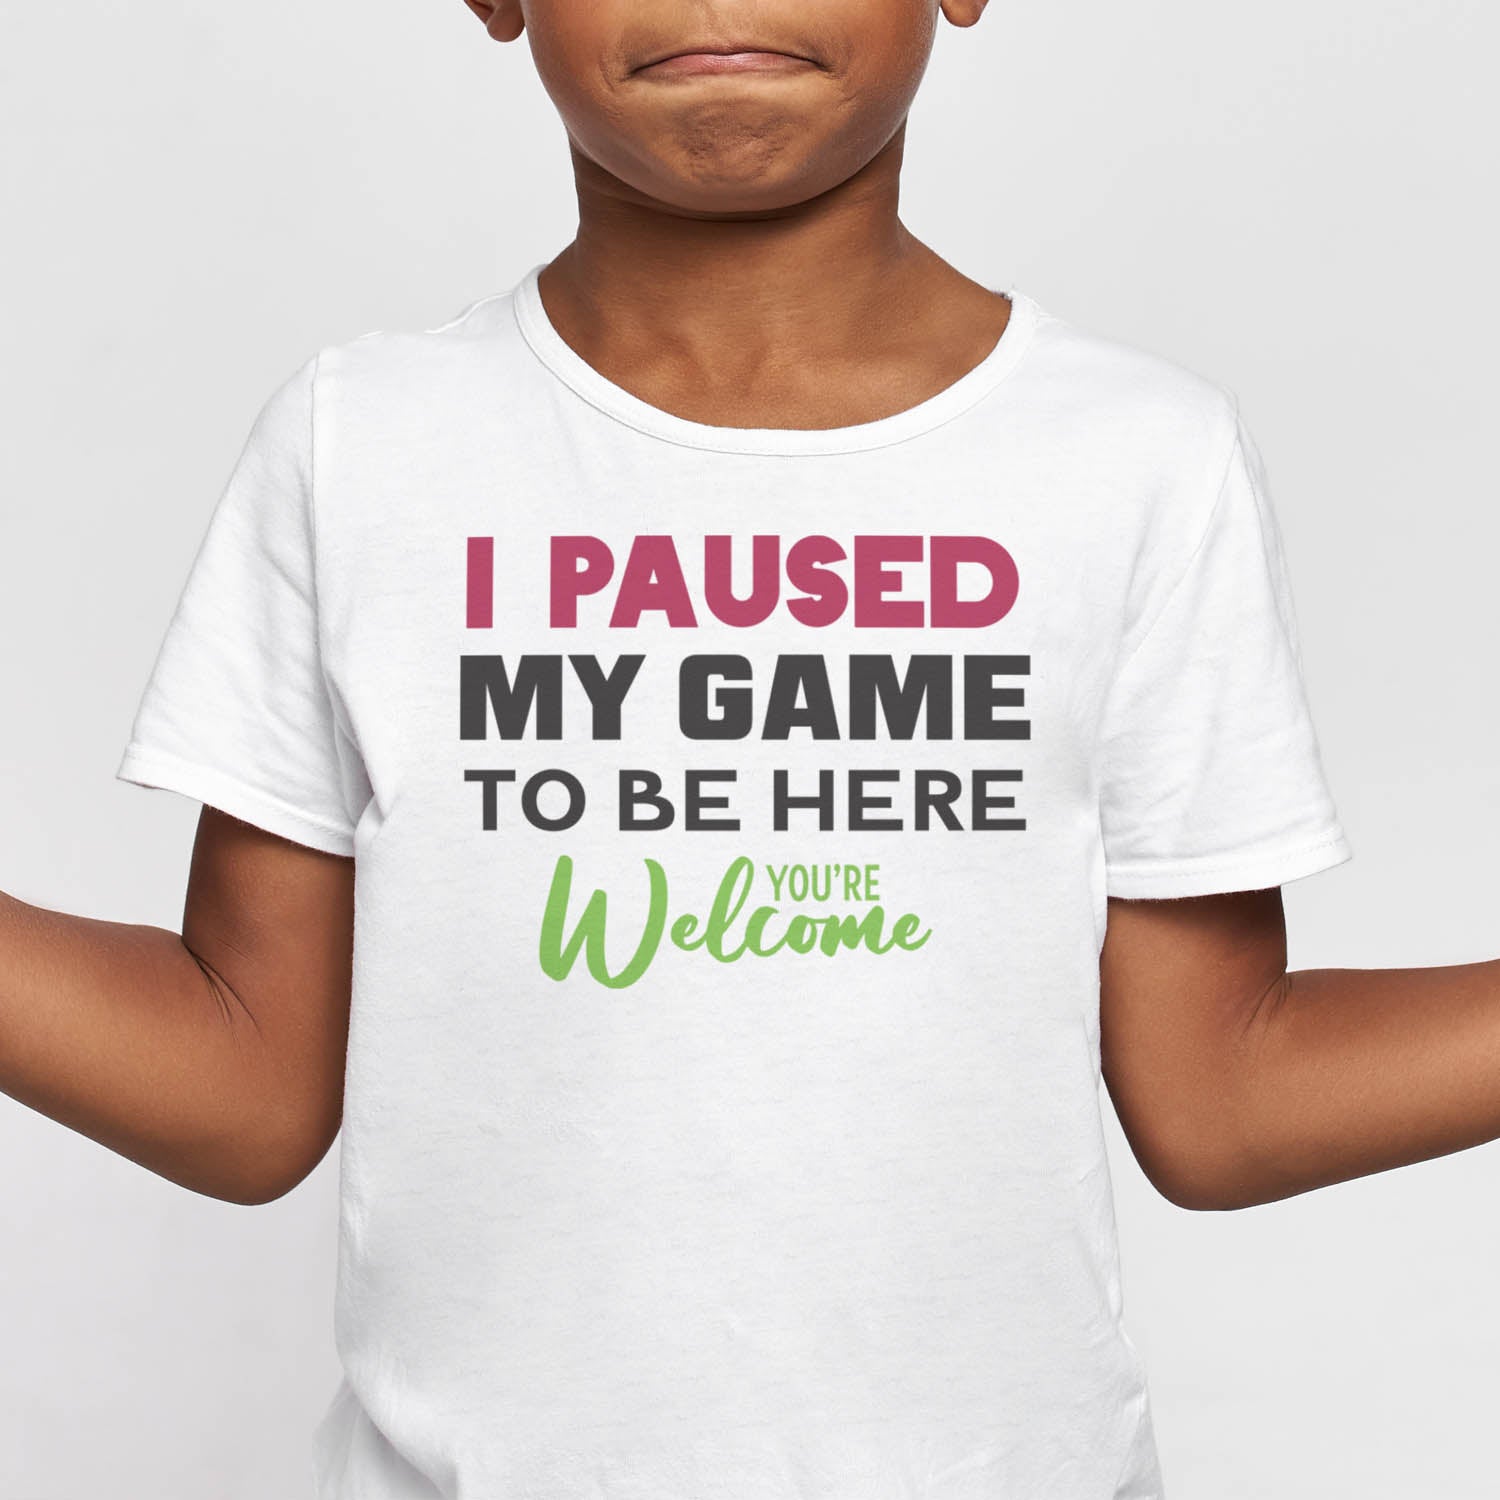 I Paused My Game To Be Here - You're Welcome - Kids T-Shirt